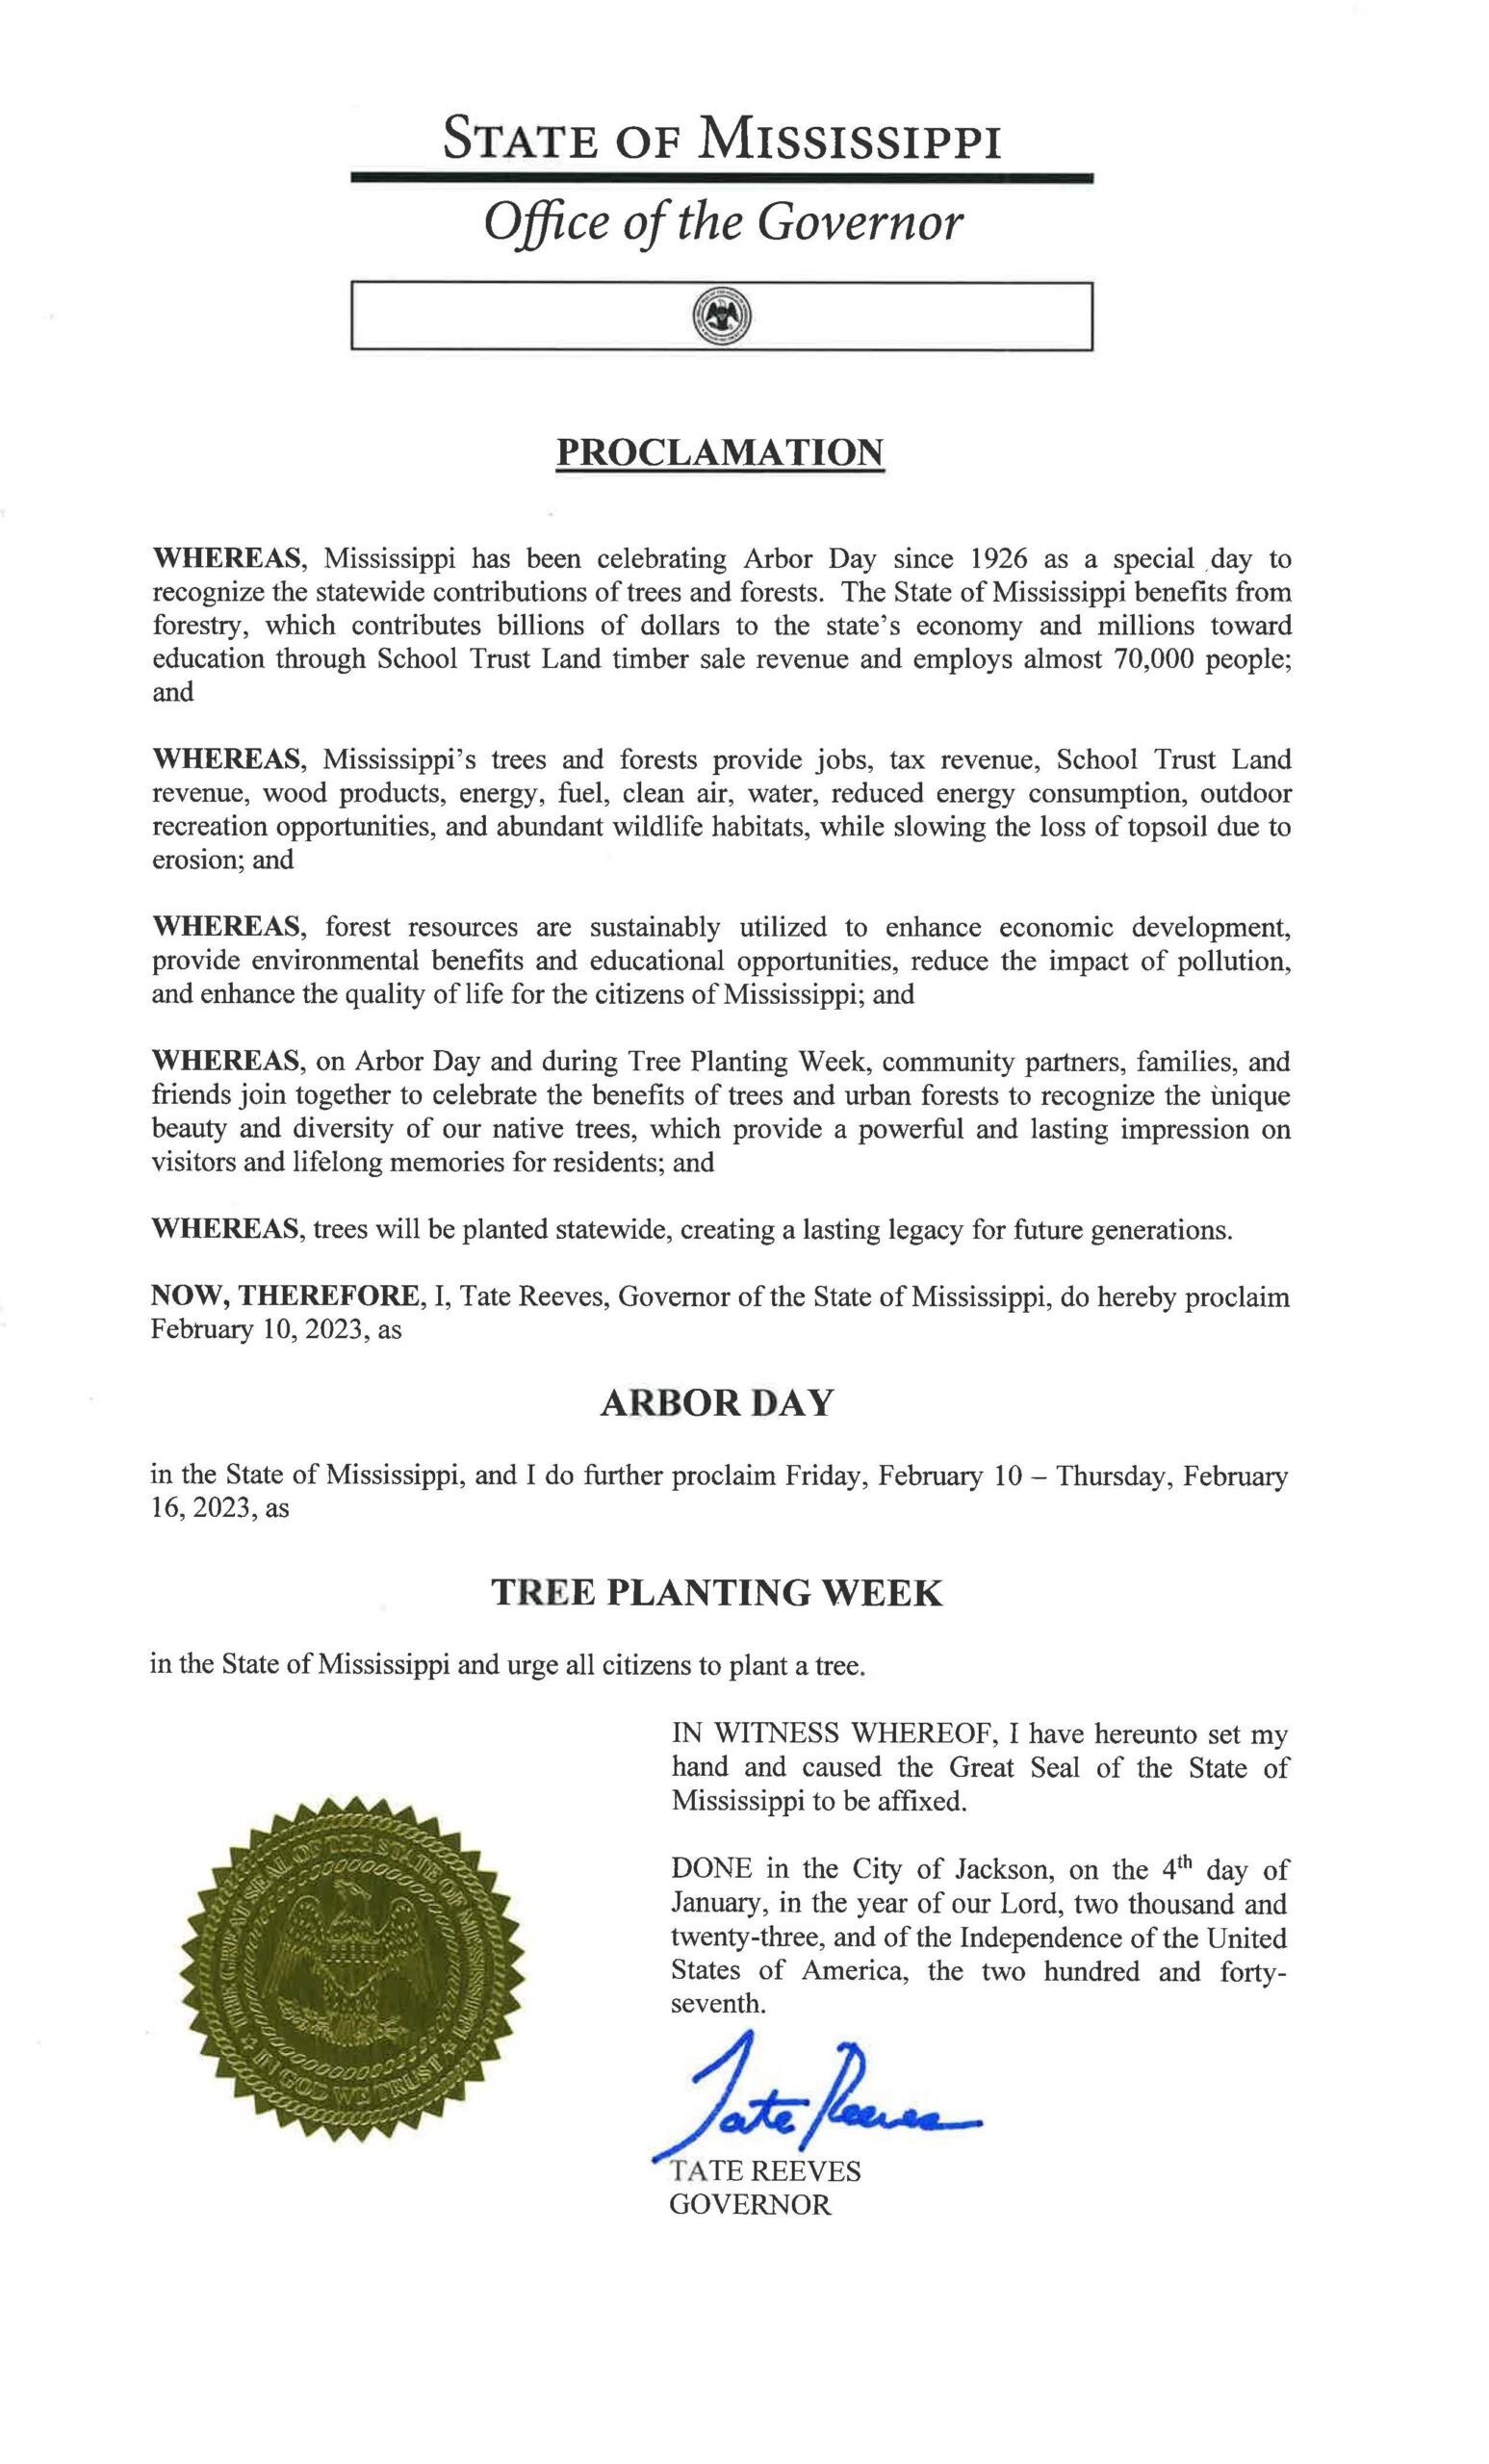 Gov. Reeves proclaims February 10 as Mississippi Arbor Day